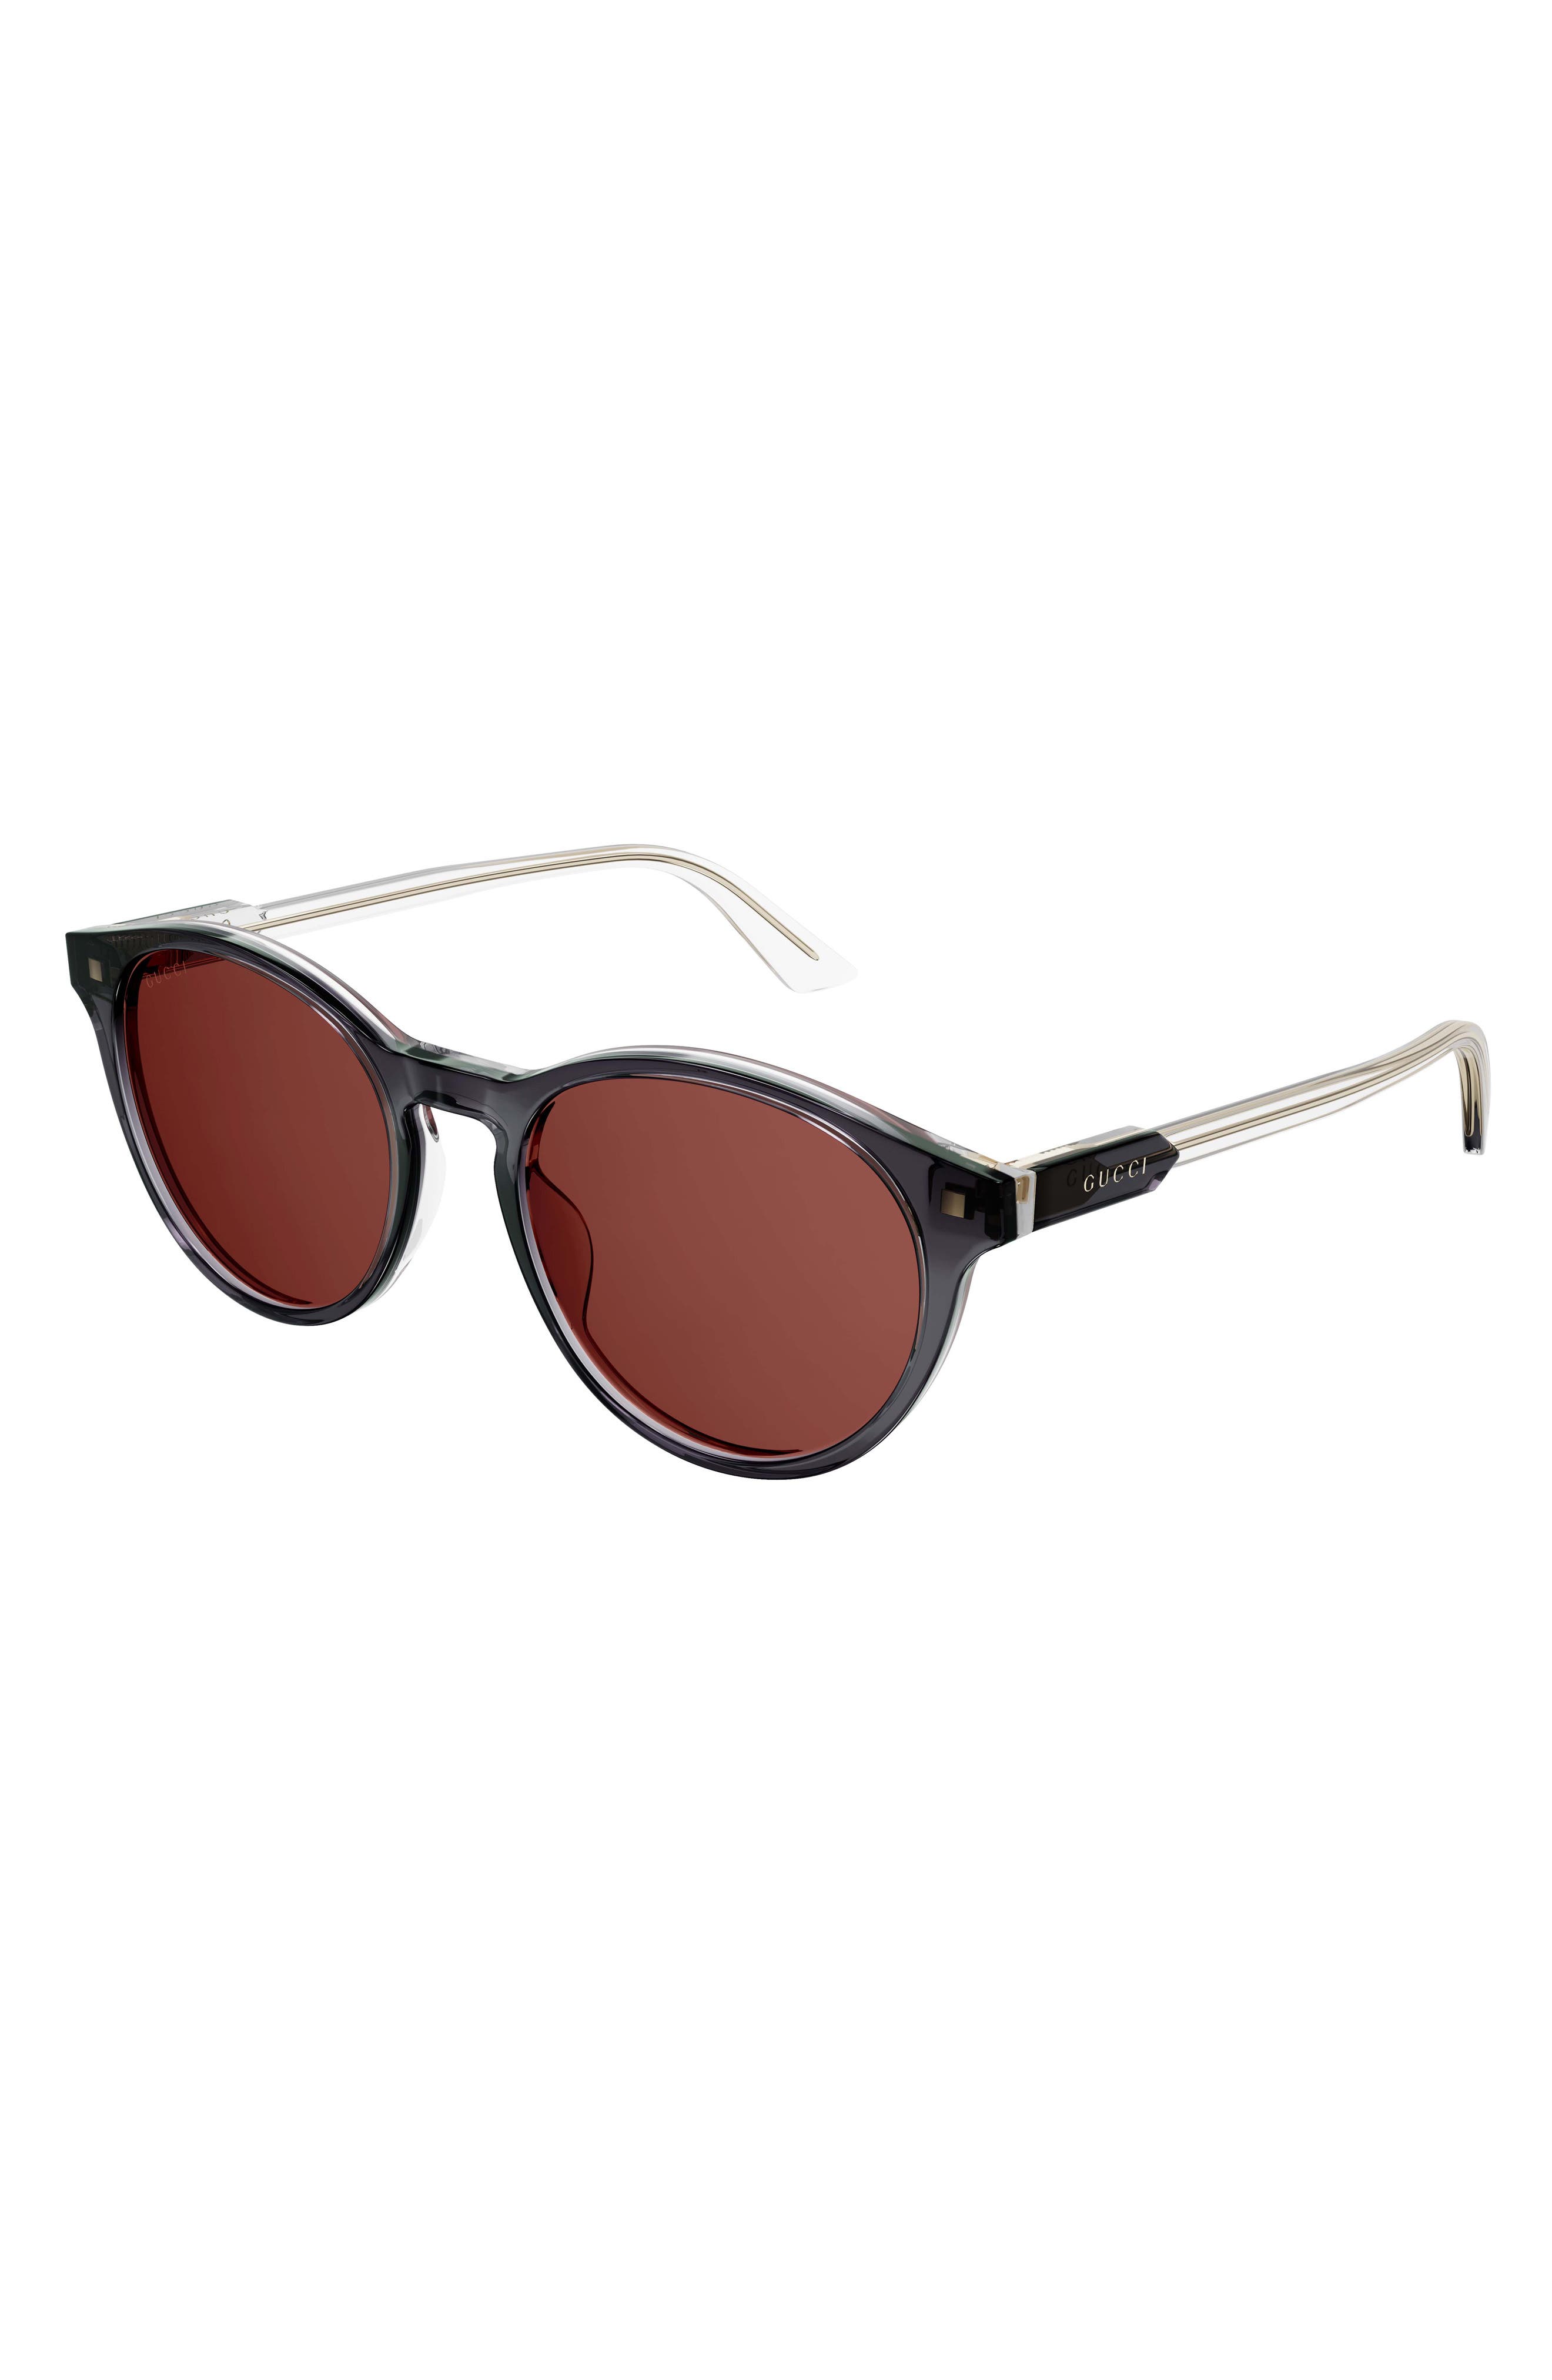 Gucci 52mm Round Sunglasses in Grey at Nordstrom